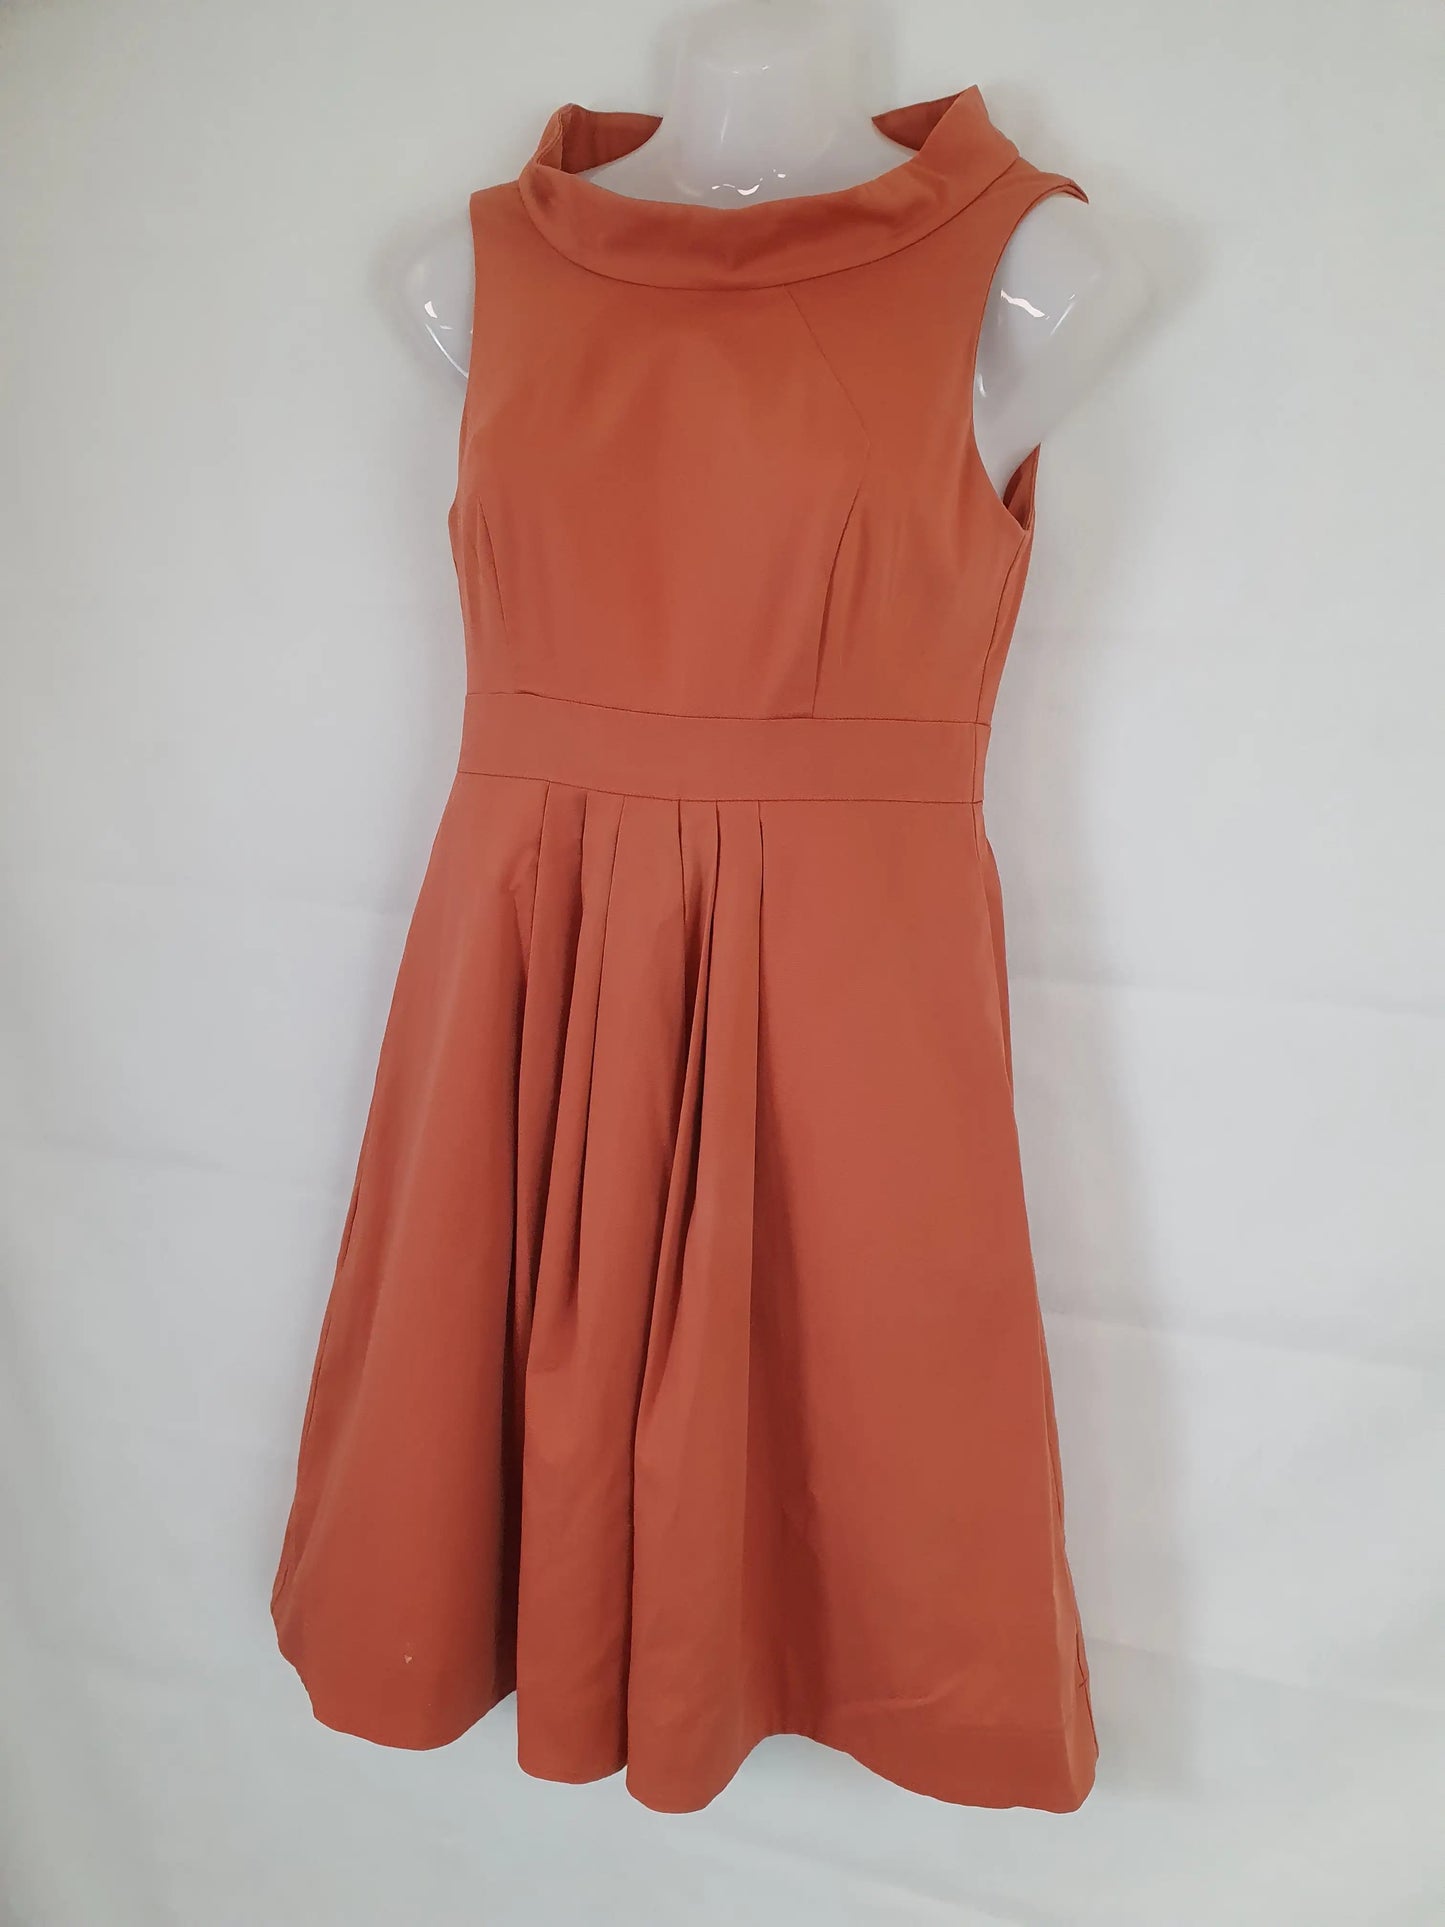 Cue High Neck Sunset Office Midi Dress Size 6 by SwapUp-Second Hand Shop-Thrift Store-Op Shop 